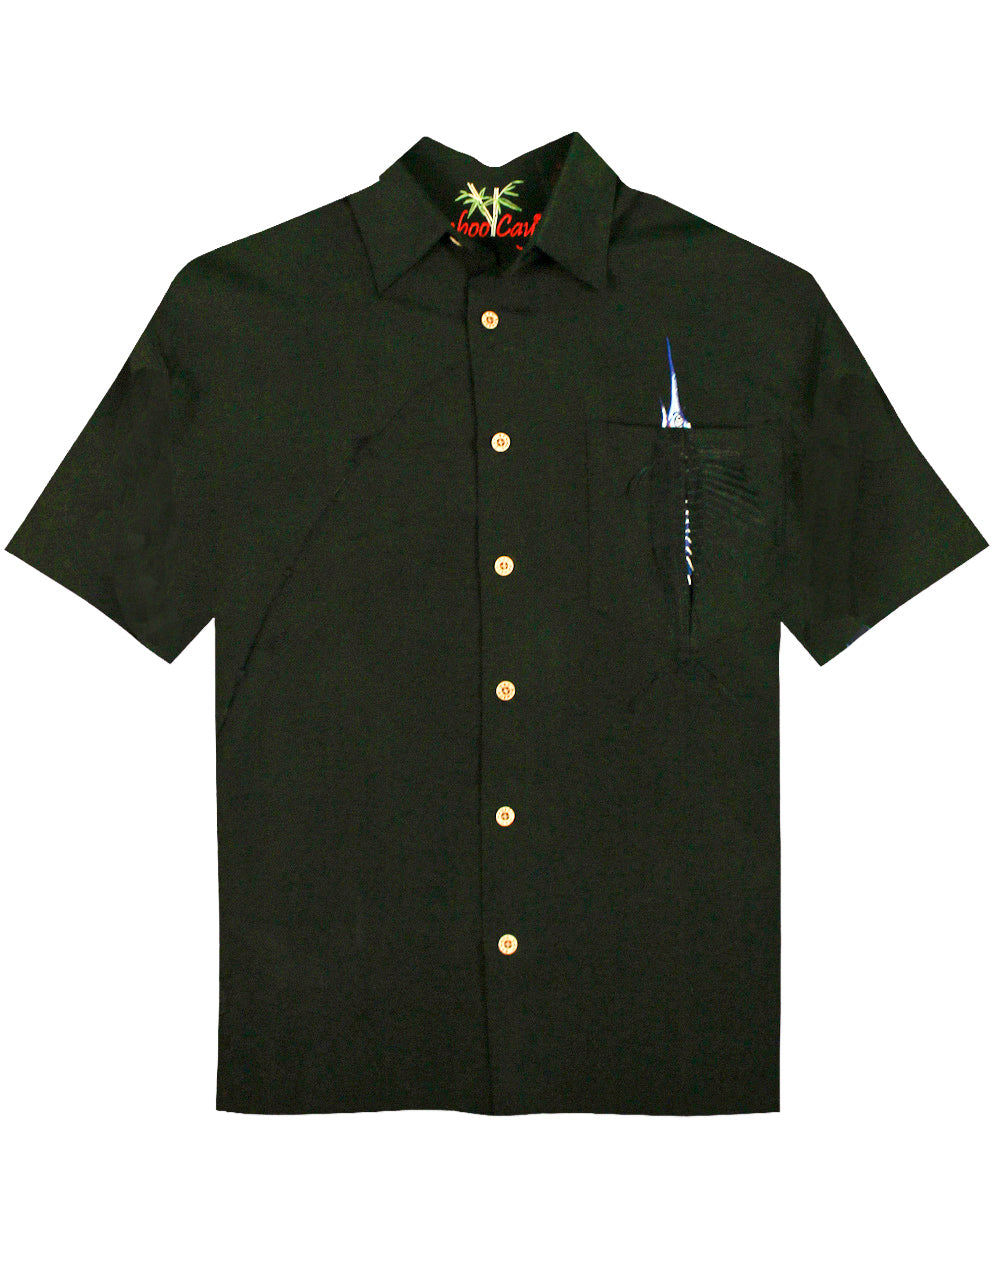 Shake the Hook Embroidered Camp Shirt by Bamboo Cay